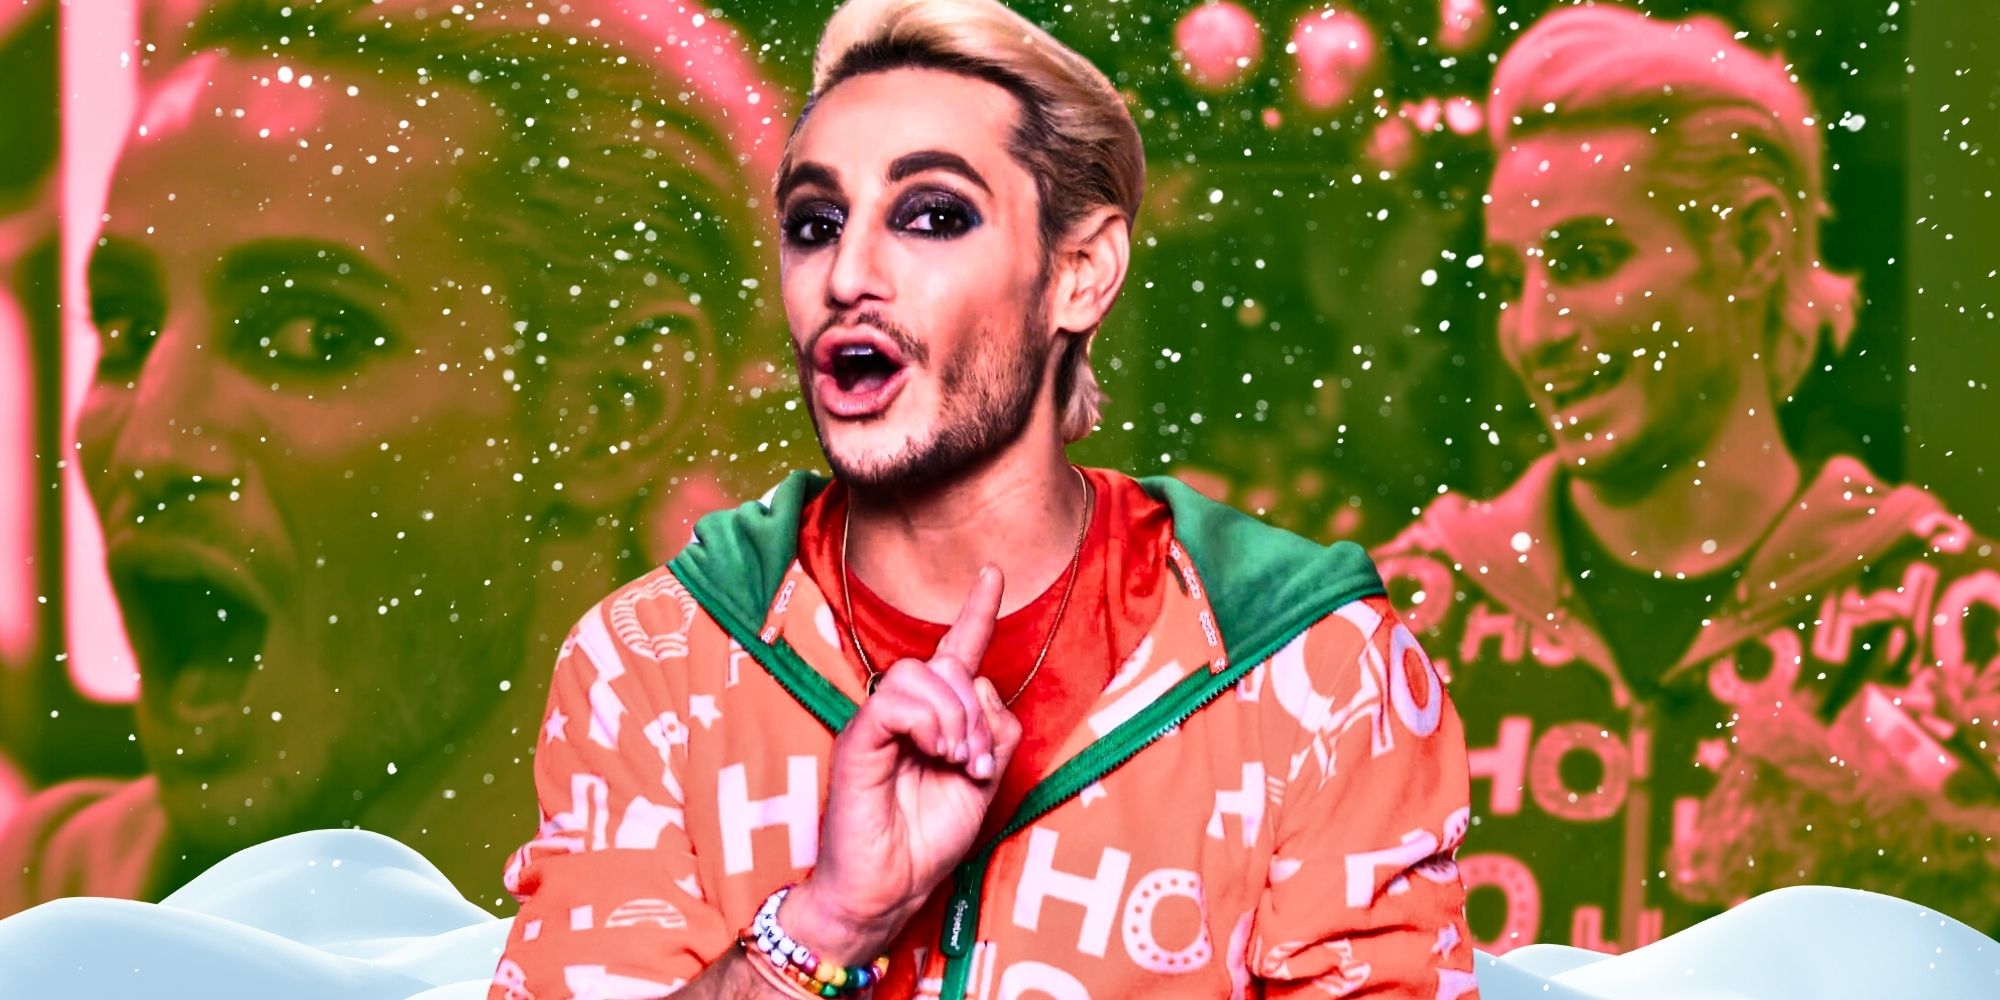 Montage of Big Brother's Frankie Grande with winter theme